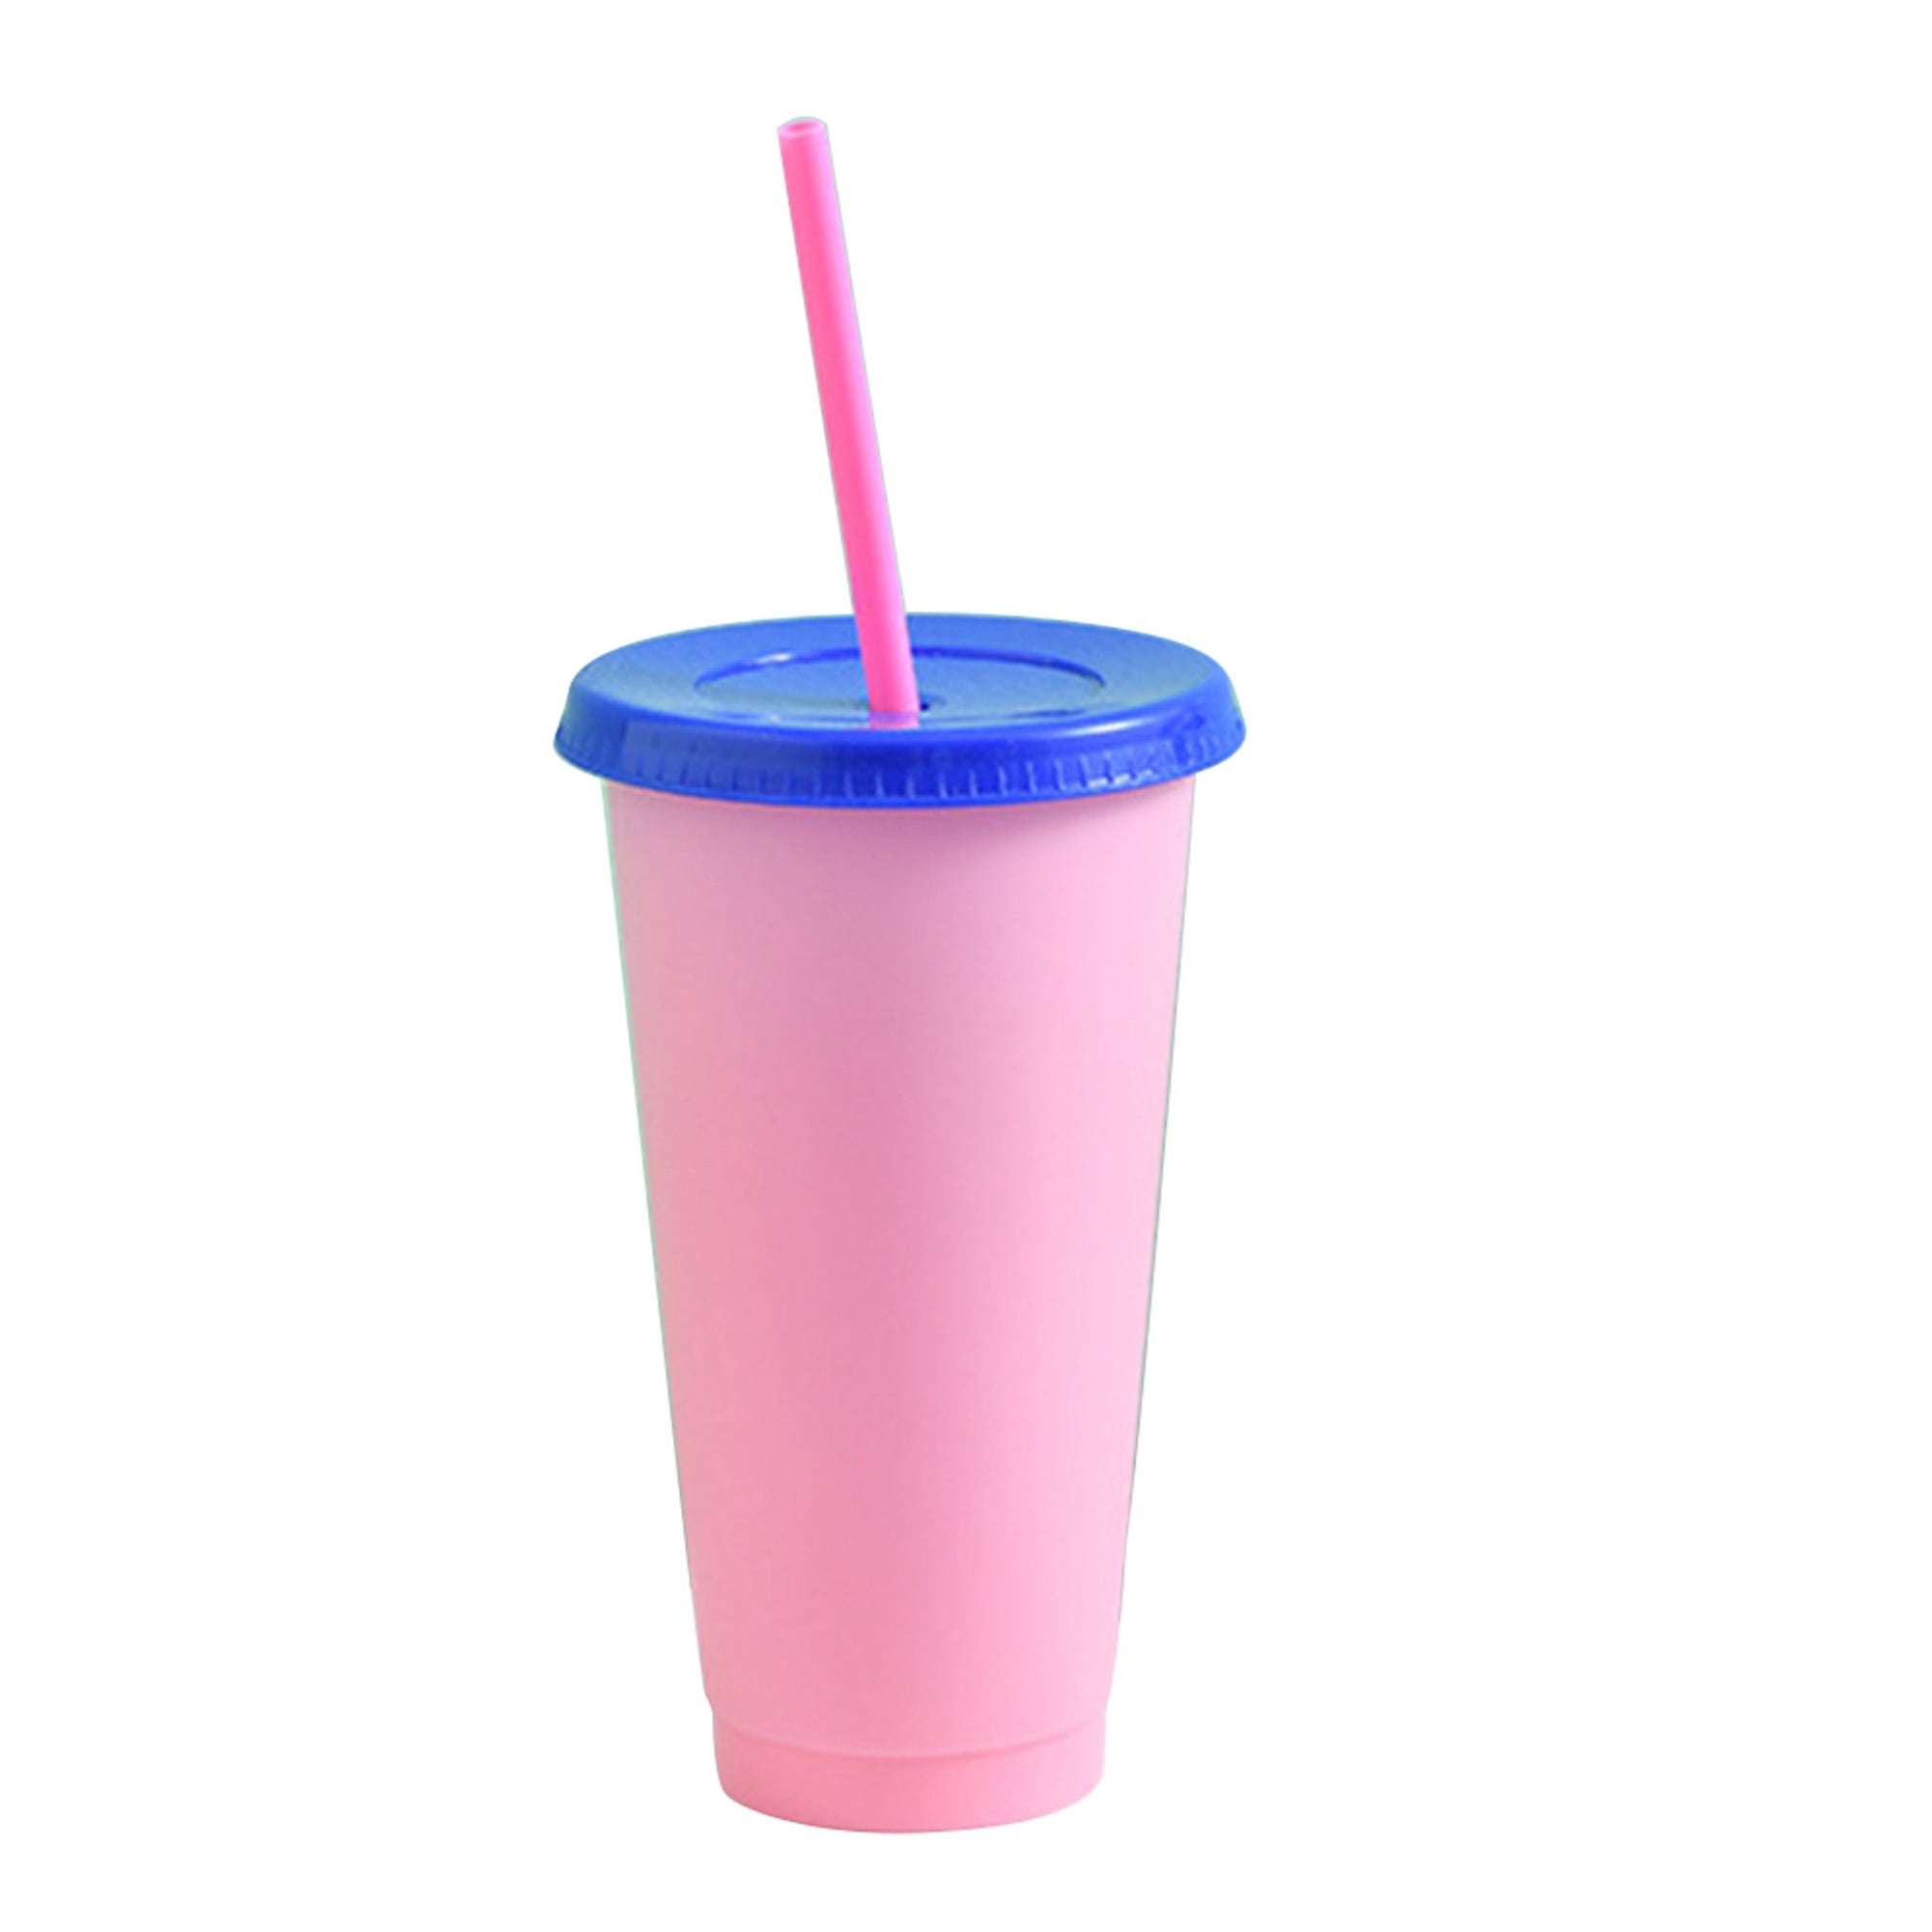 Sunisery Color Changing Plastic Cups with Lids and Straws